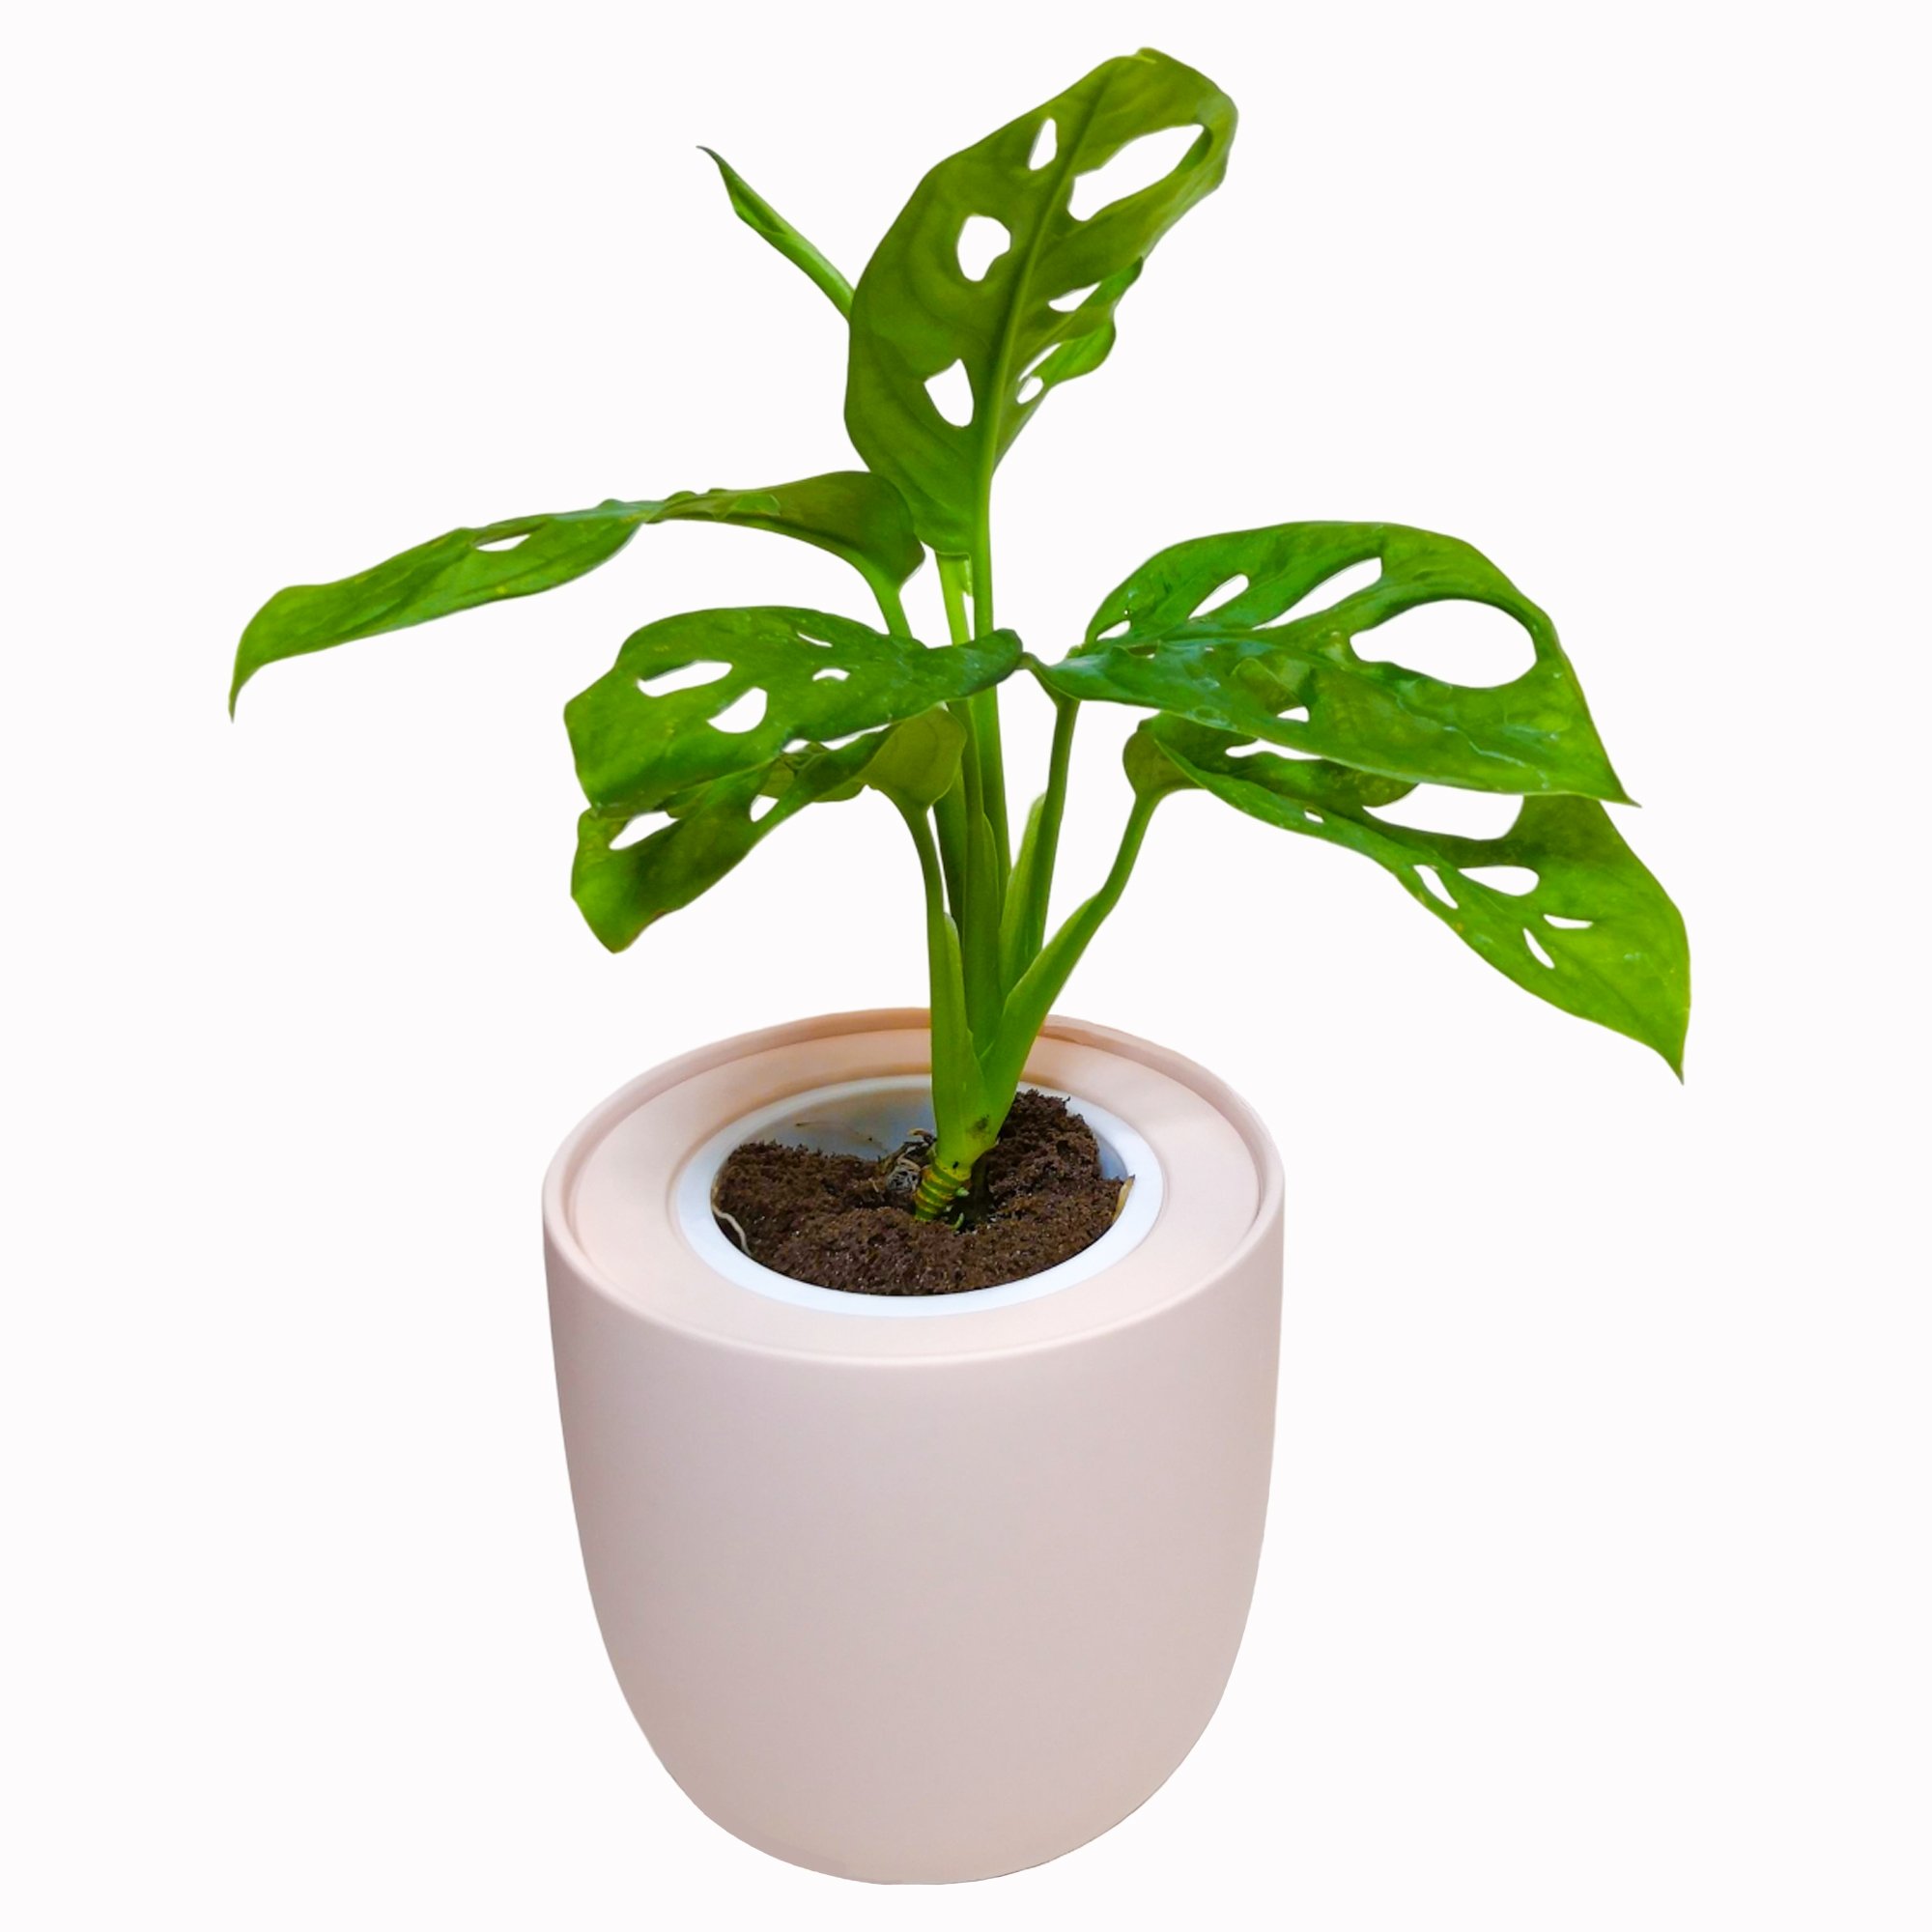 Monstera Monkey Mask Pink Ceramic Pot Hydroponic Growing Kit with Seeds